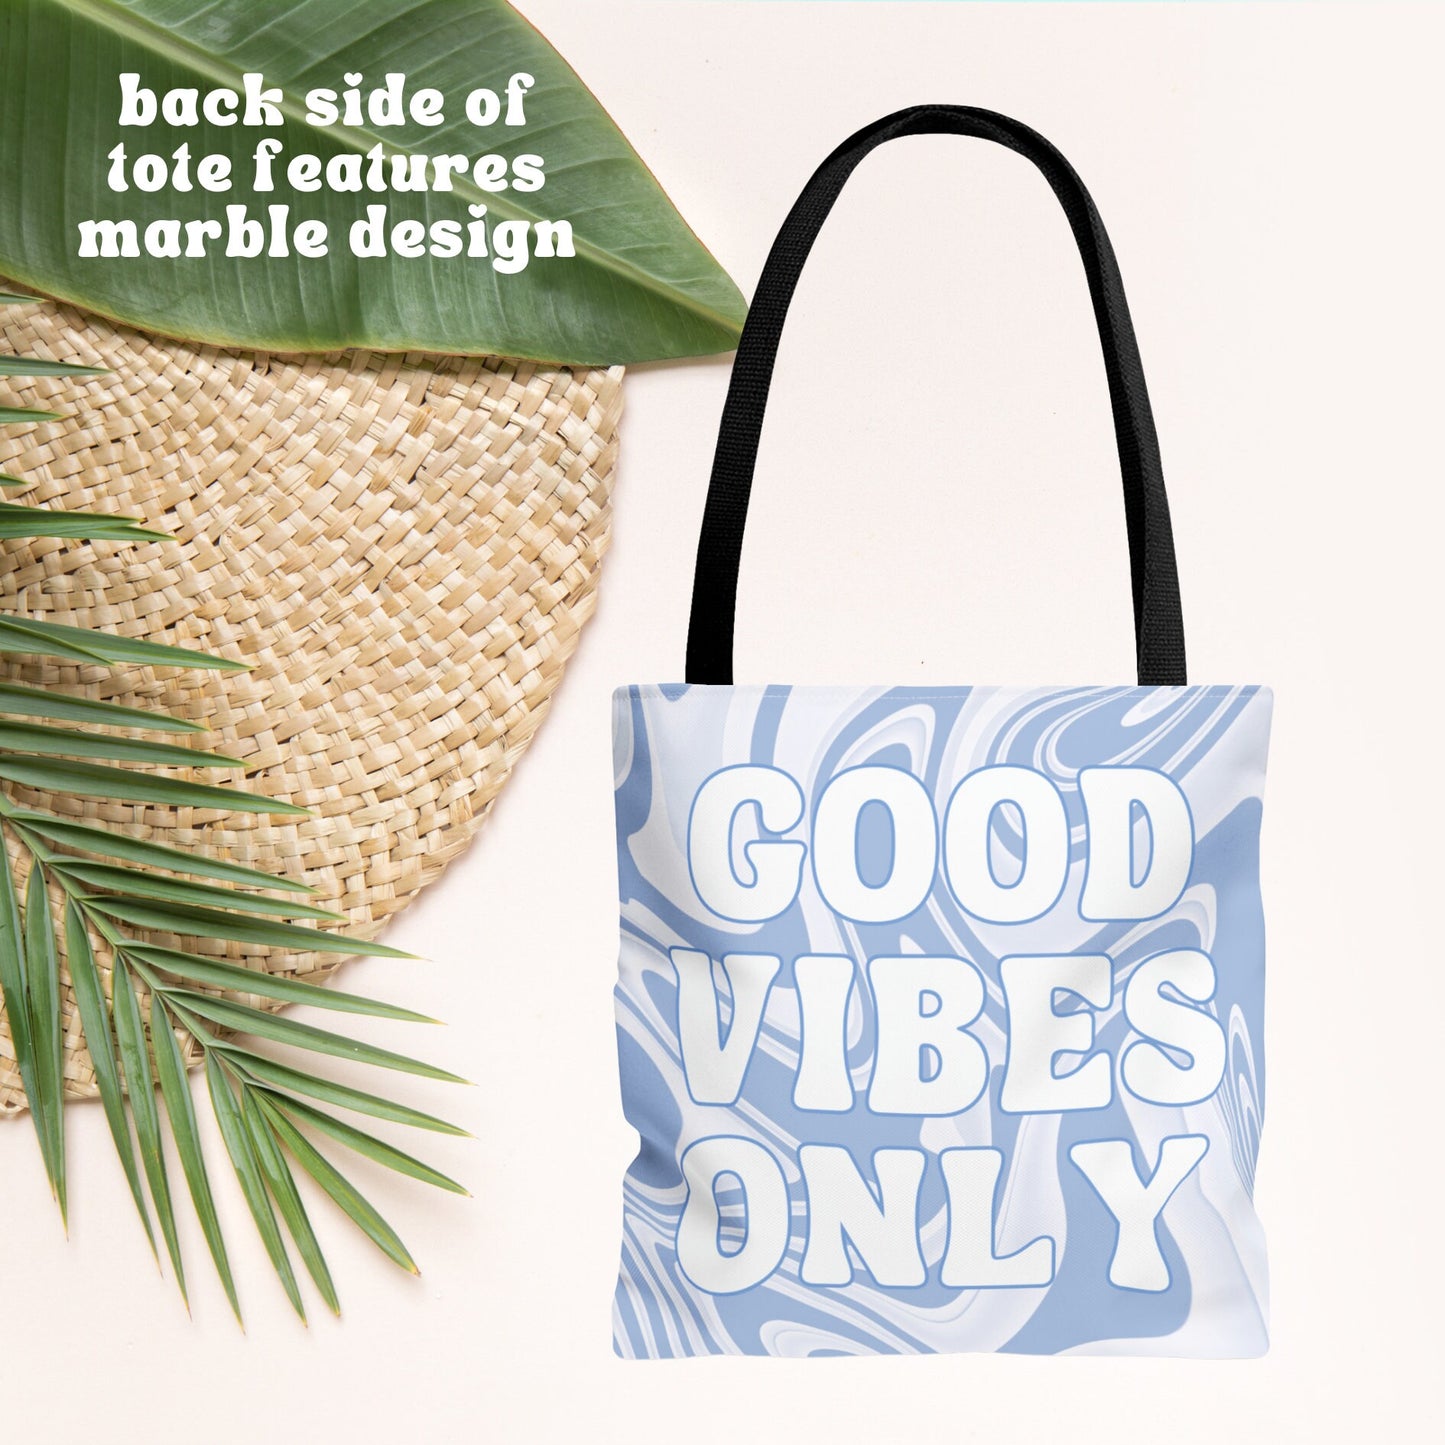 Good Vibes Only Beach Graphic Tote - Double Sided Beach Tote Bag